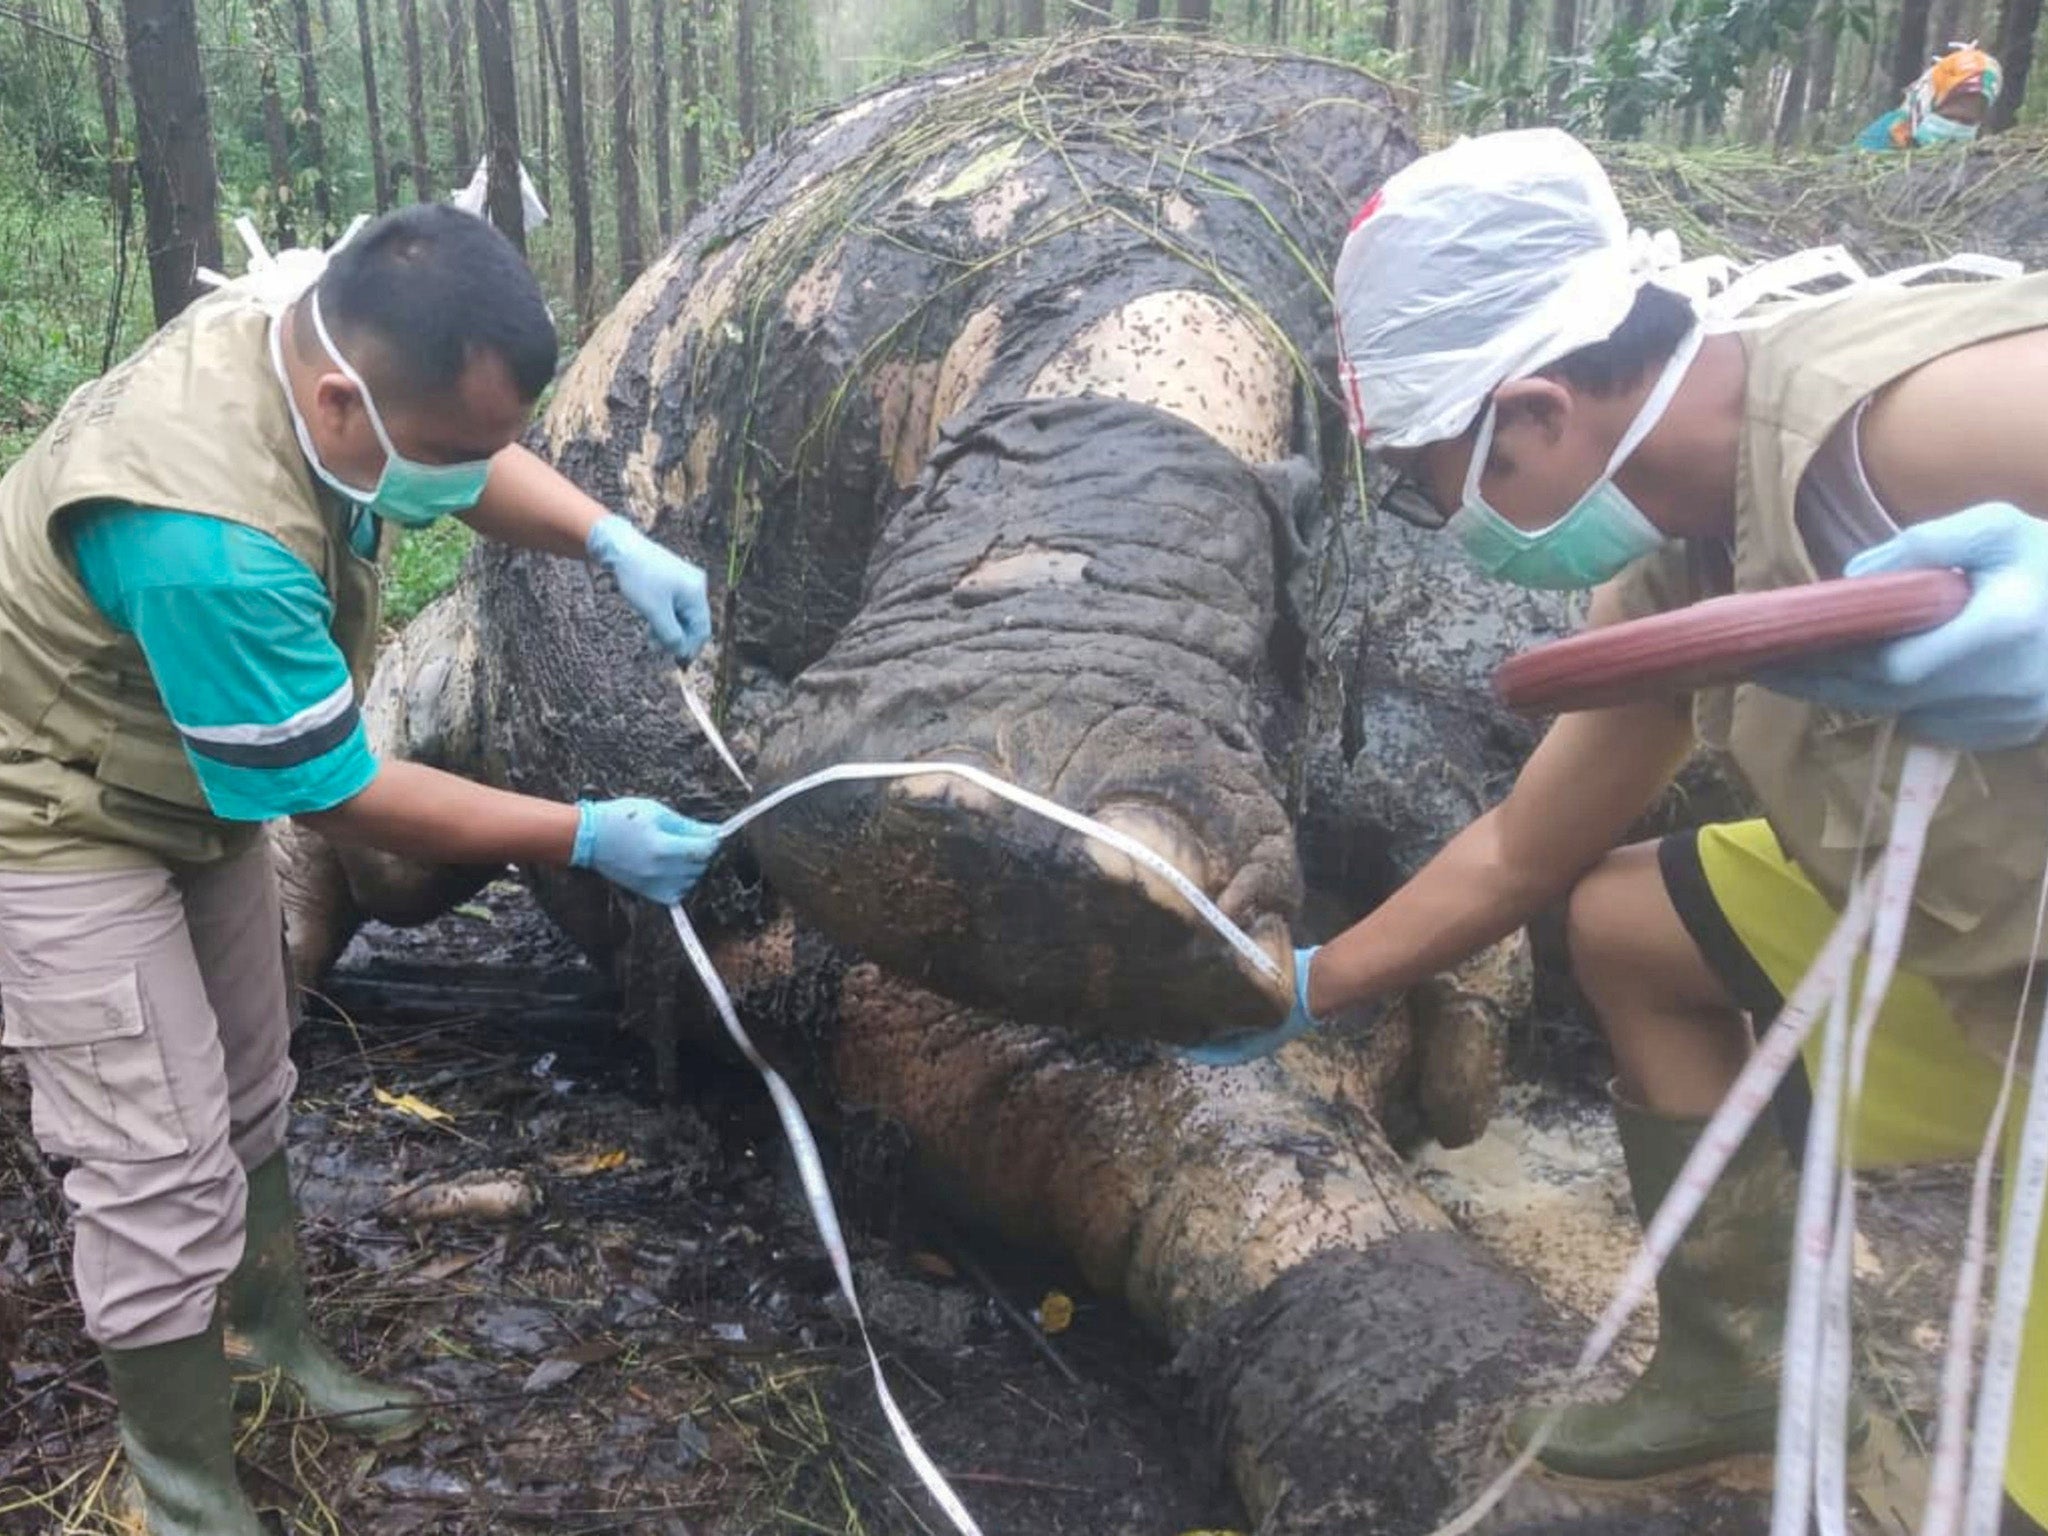 Elephant found in Riau province with its head and tusks removed